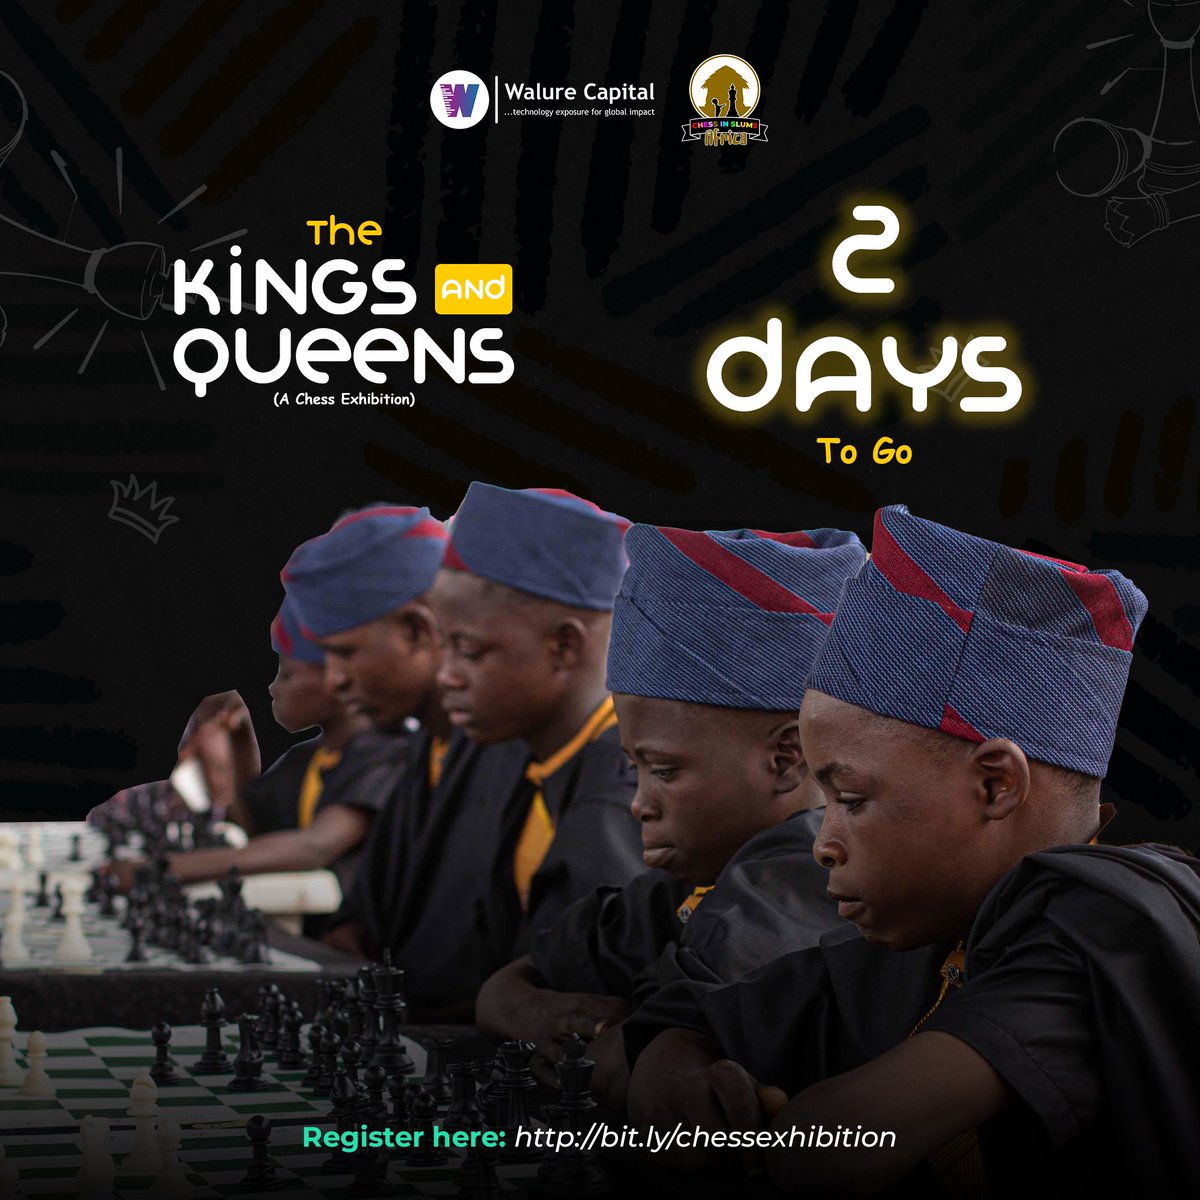 2 days to go! 🎉 

Join us as we embark on an extraordinary journey of creating unforgettable memories together @chessinslums 

Save the date: Saturday, June 3rd, 2023. Don't miss out on this incredible event! Secure your spot by completing the form⏰

bit.ly/chessexhibition